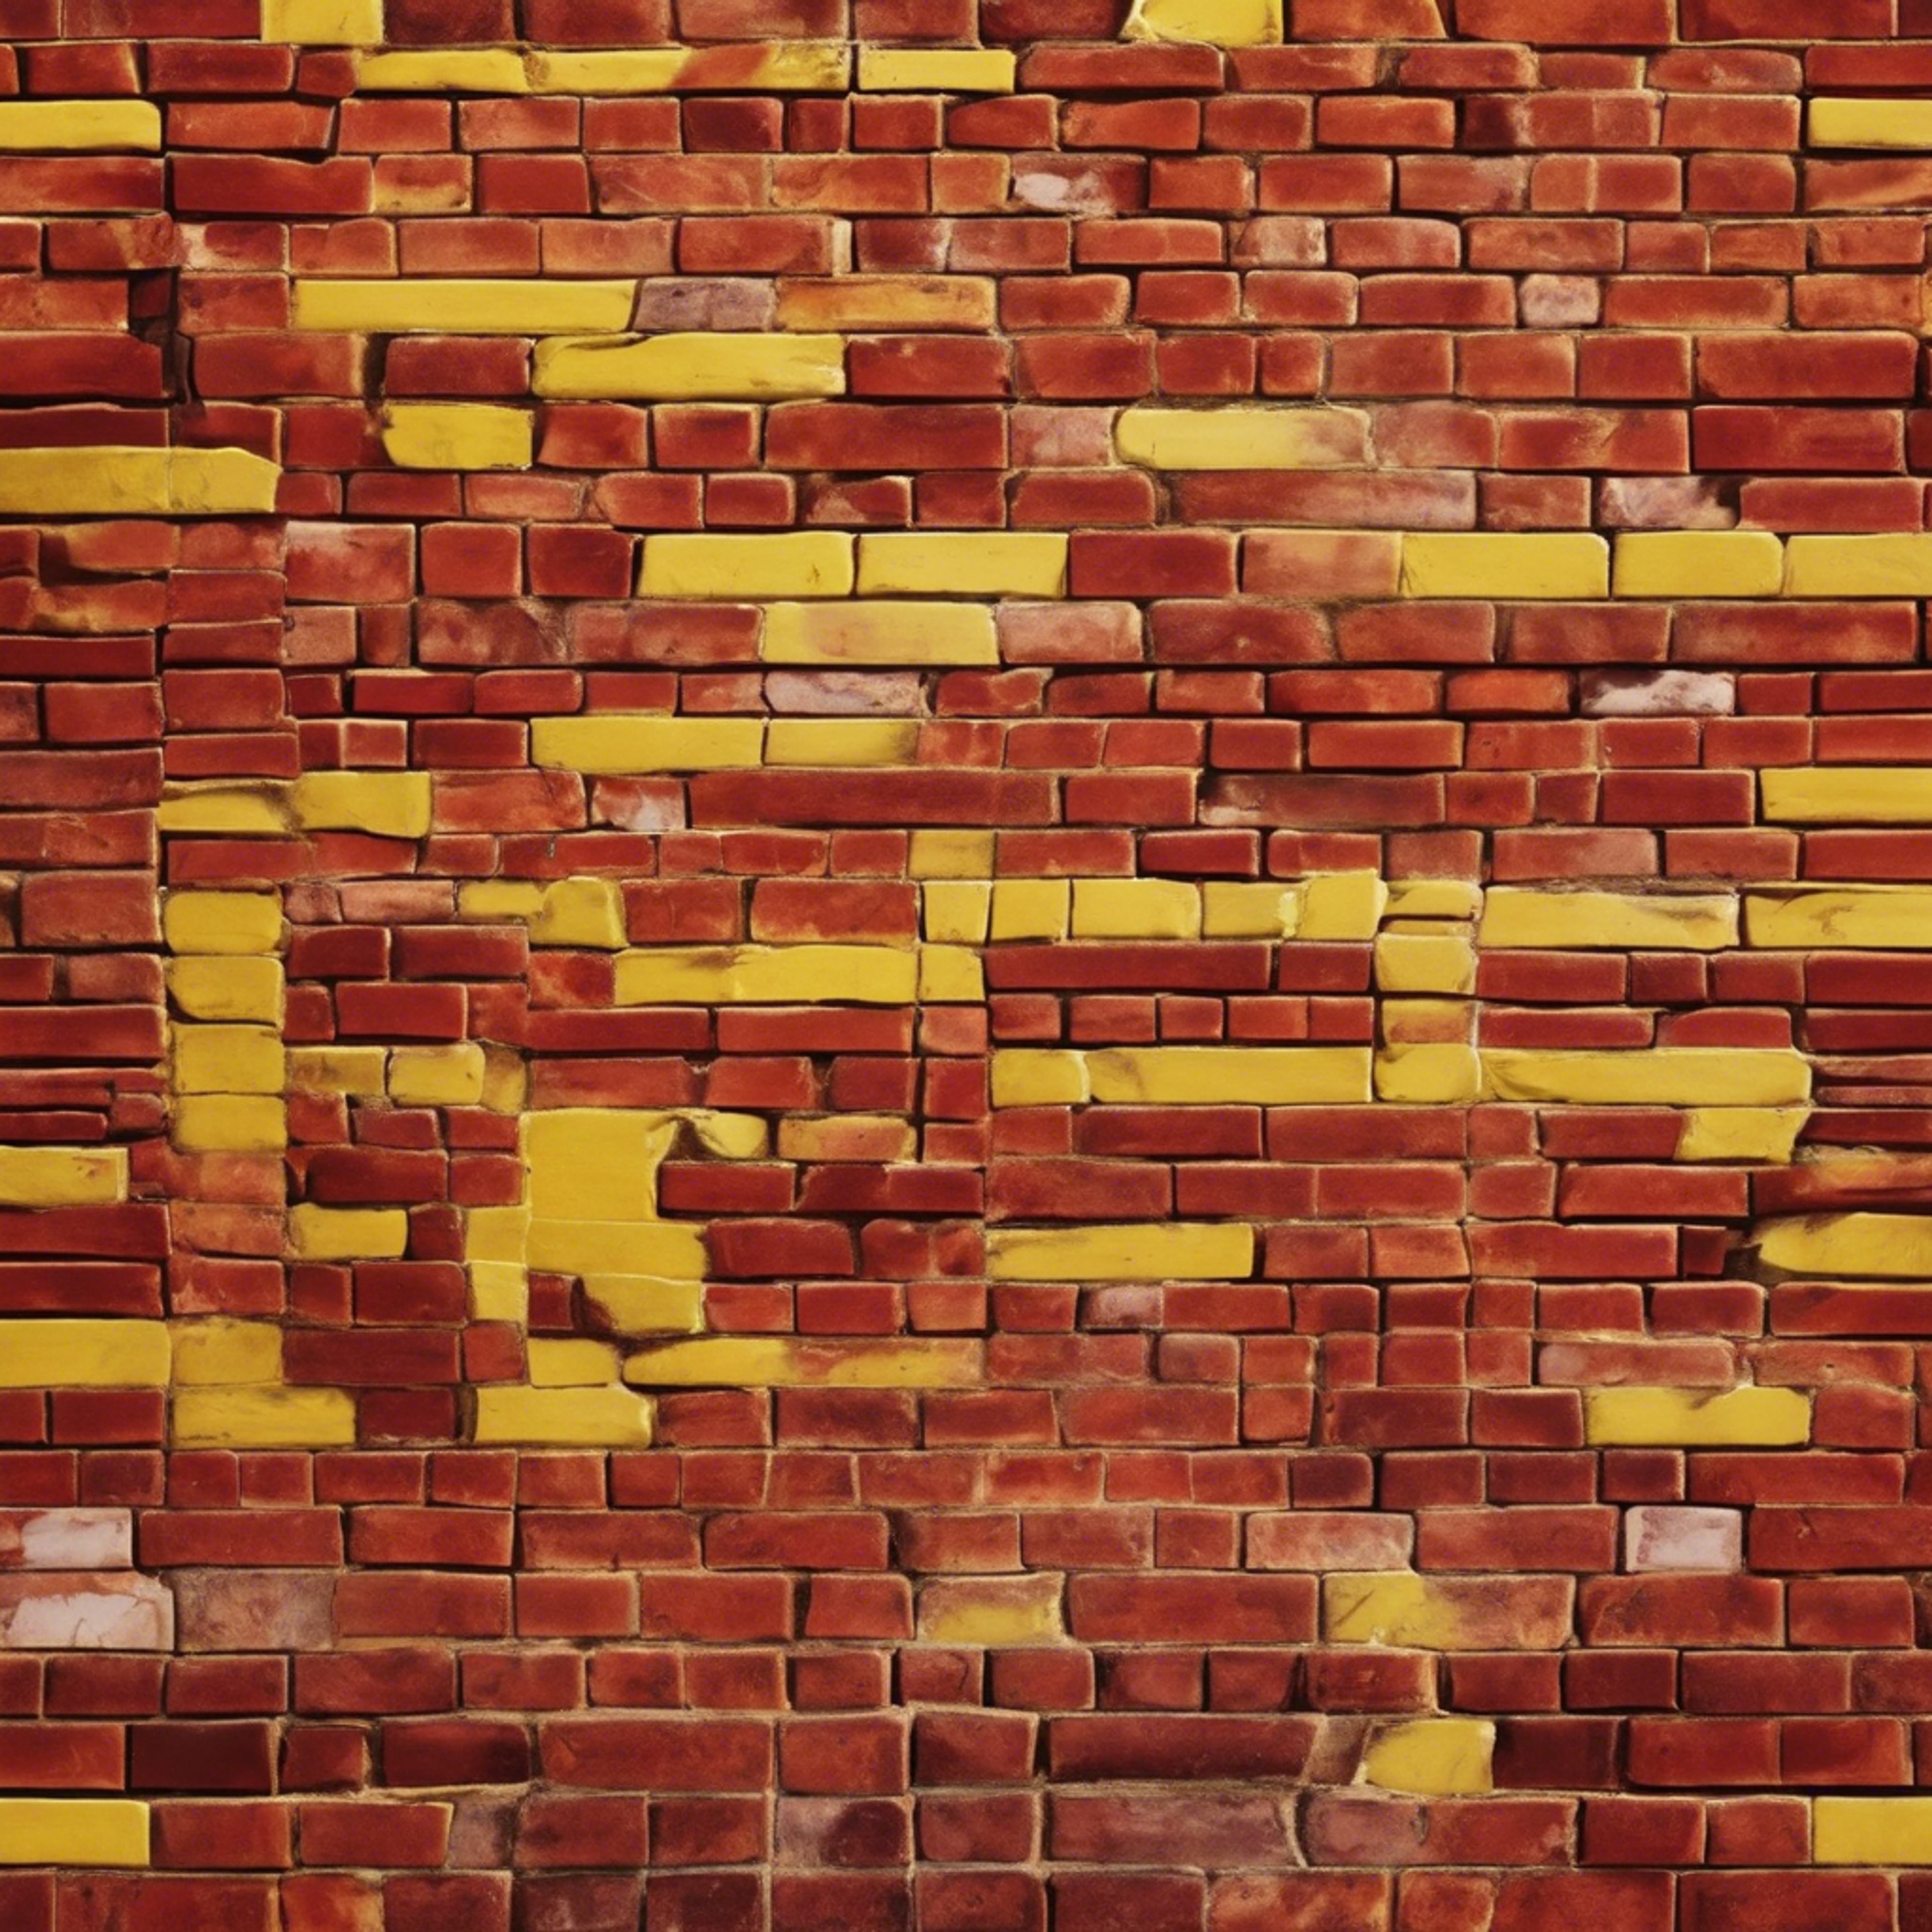 Red and yellow brick pattern seen through the illusion of a watery surface - the bricks appear slightly distorted yet colorful.壁紙[6ac5a5324f9a41fcbc3c]